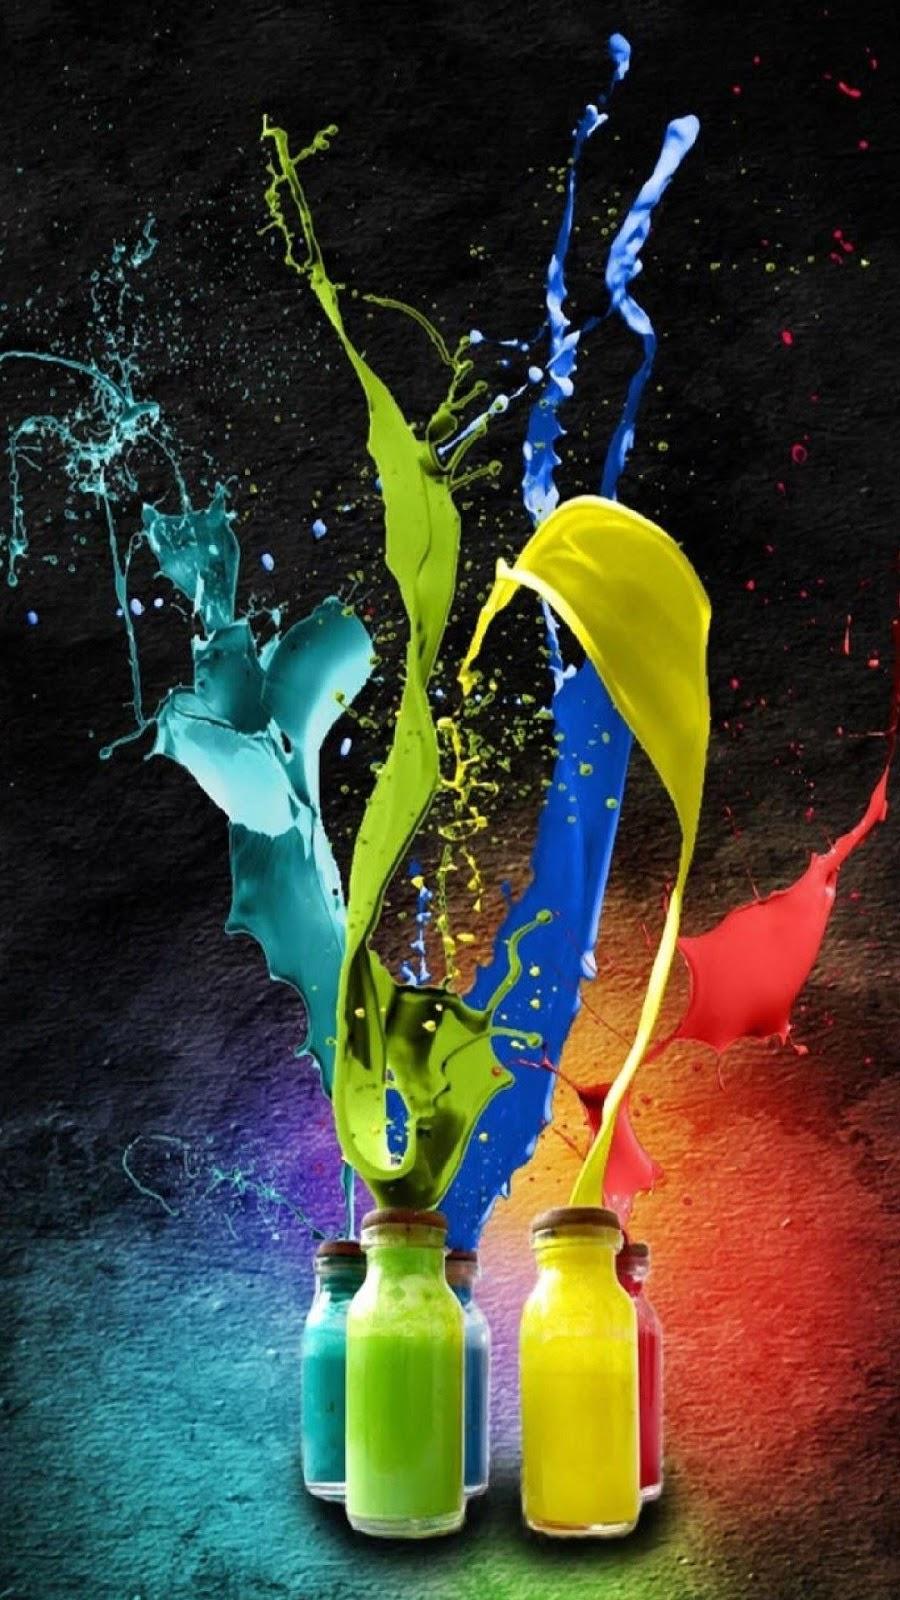 Android Image Wallpaper Abstract Color Bottles Splash. The Best